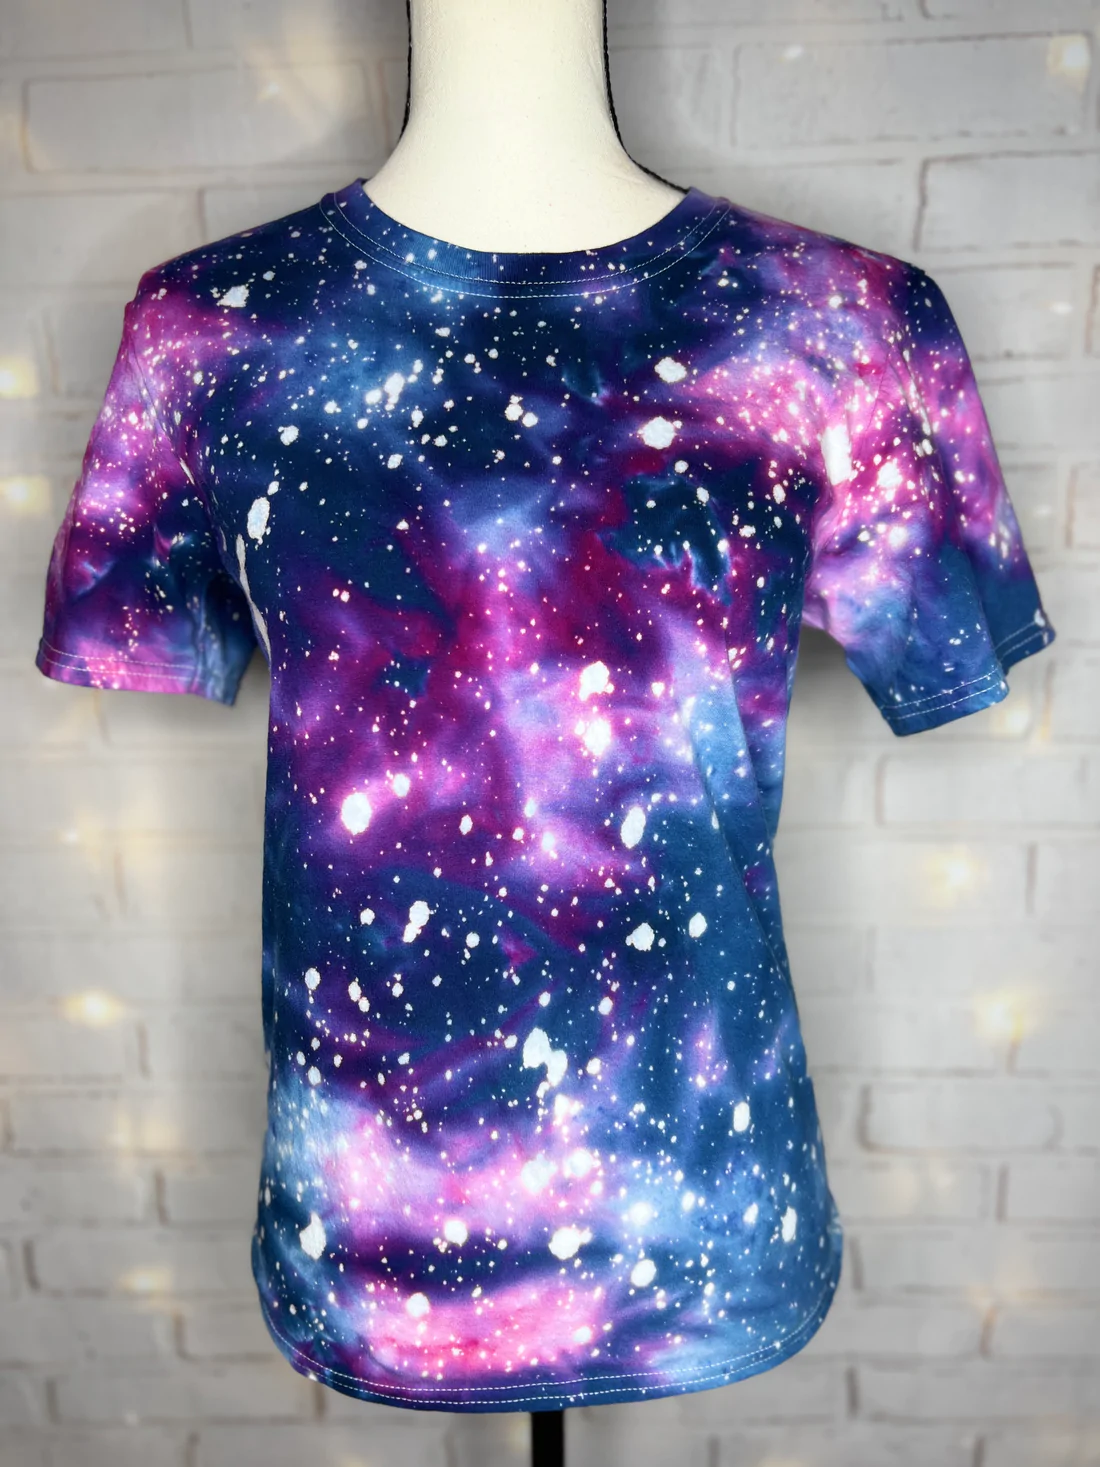 Red, White, and Black Nebula Tie Dye Shirt and More - Tie Dye Wholesaler